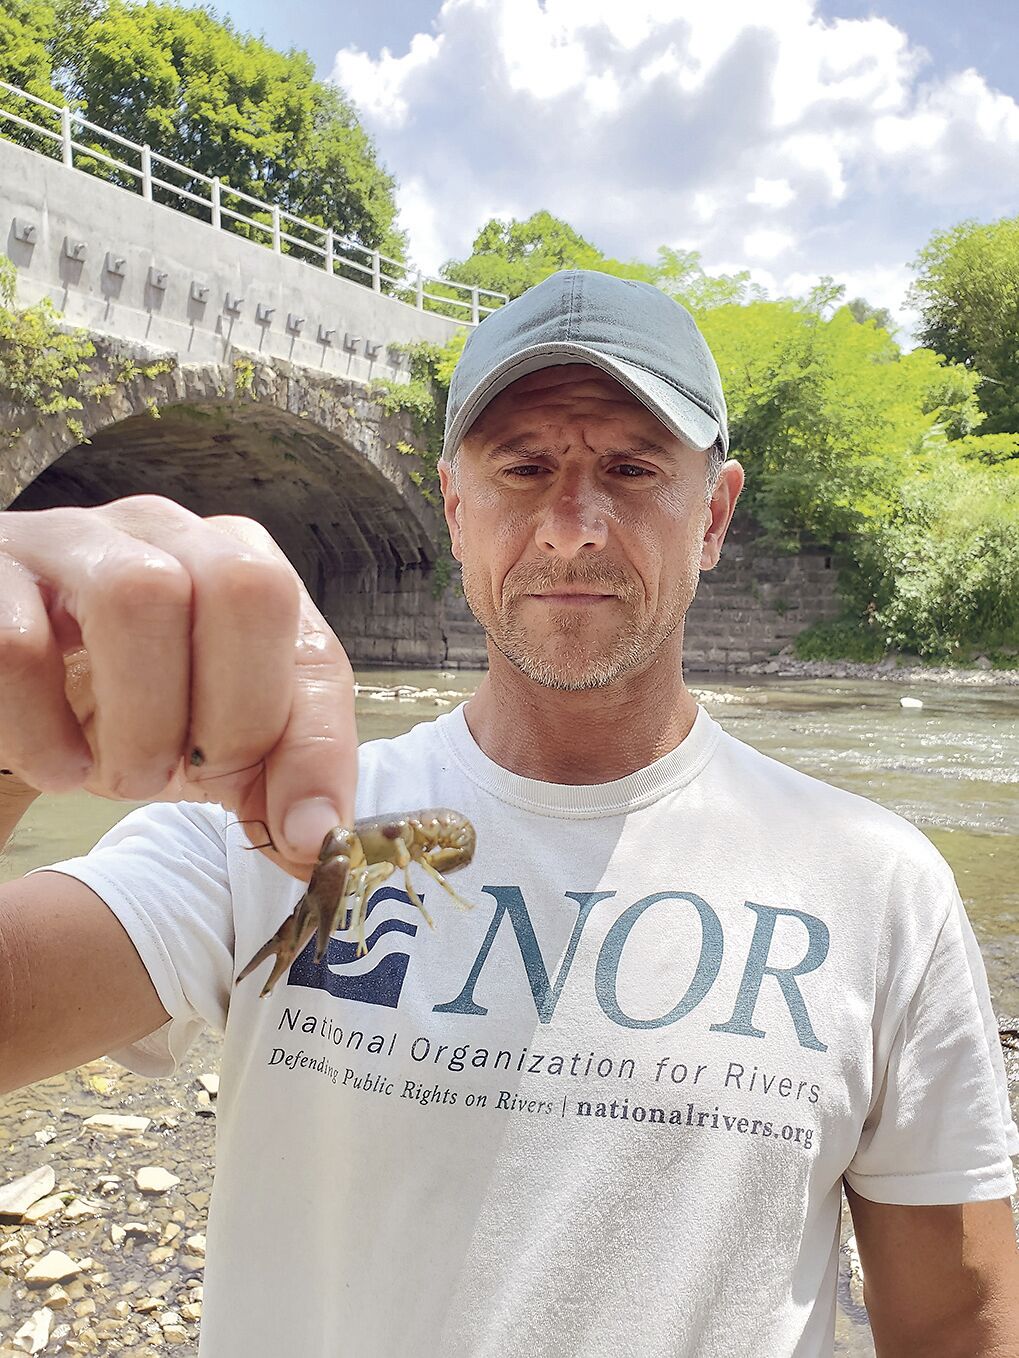 Will the rusty crayfish get its claws on more Chesapeake streams